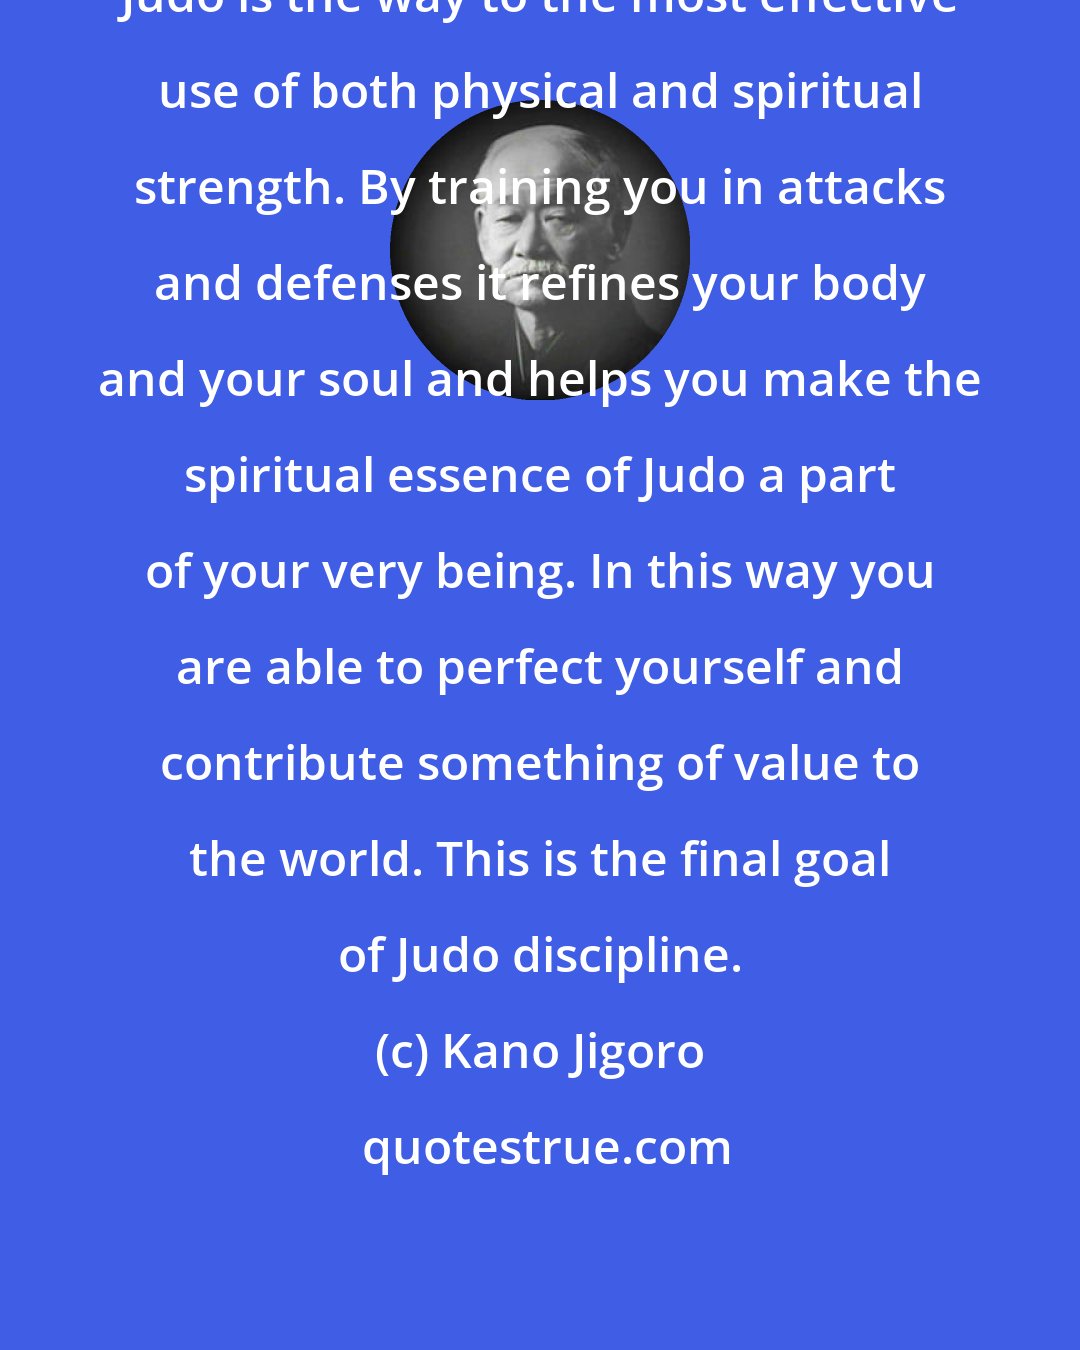 Kano Jigoro: Judo is the way to the most effective use of both physical and spiritual strength. By training you in attacks and defenses it refines your body and your soul and helps you make the spiritual essence of Judo a part of your very being. In this way you are able to perfect yourself and contribute something of value to the world. This is the final goal of Judo discipline.